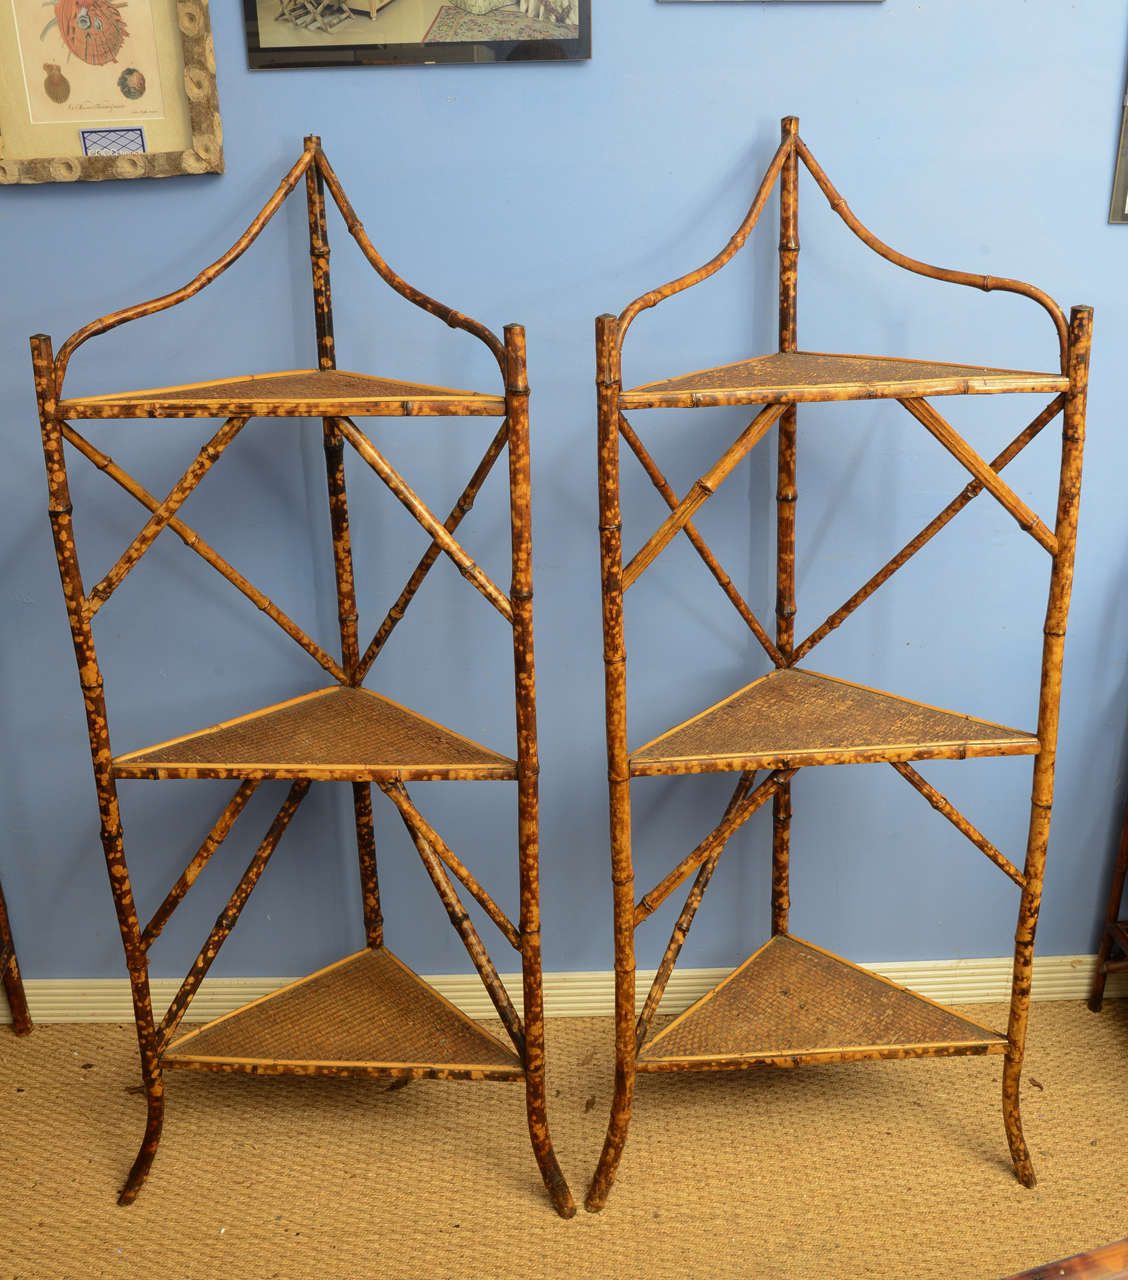 Very unusual corner etagere with tortoise bamboo and rattan.